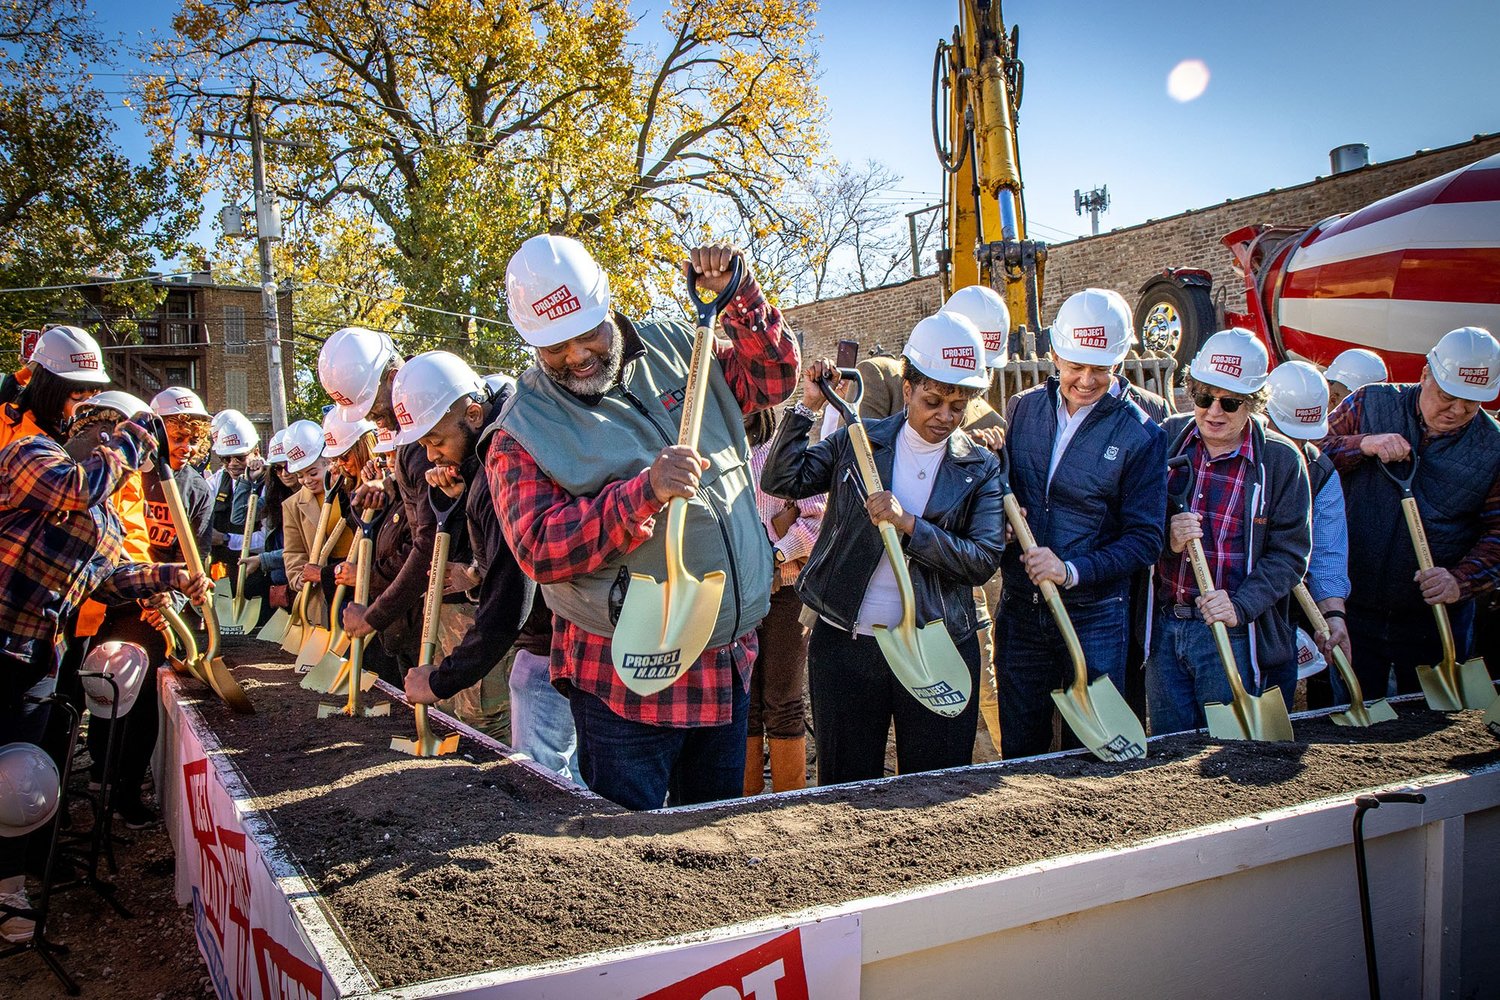 Project HOOD breaks ground on the new Leadership and Economic Opportunity Center in Chicago's Woodlawn neighborhood